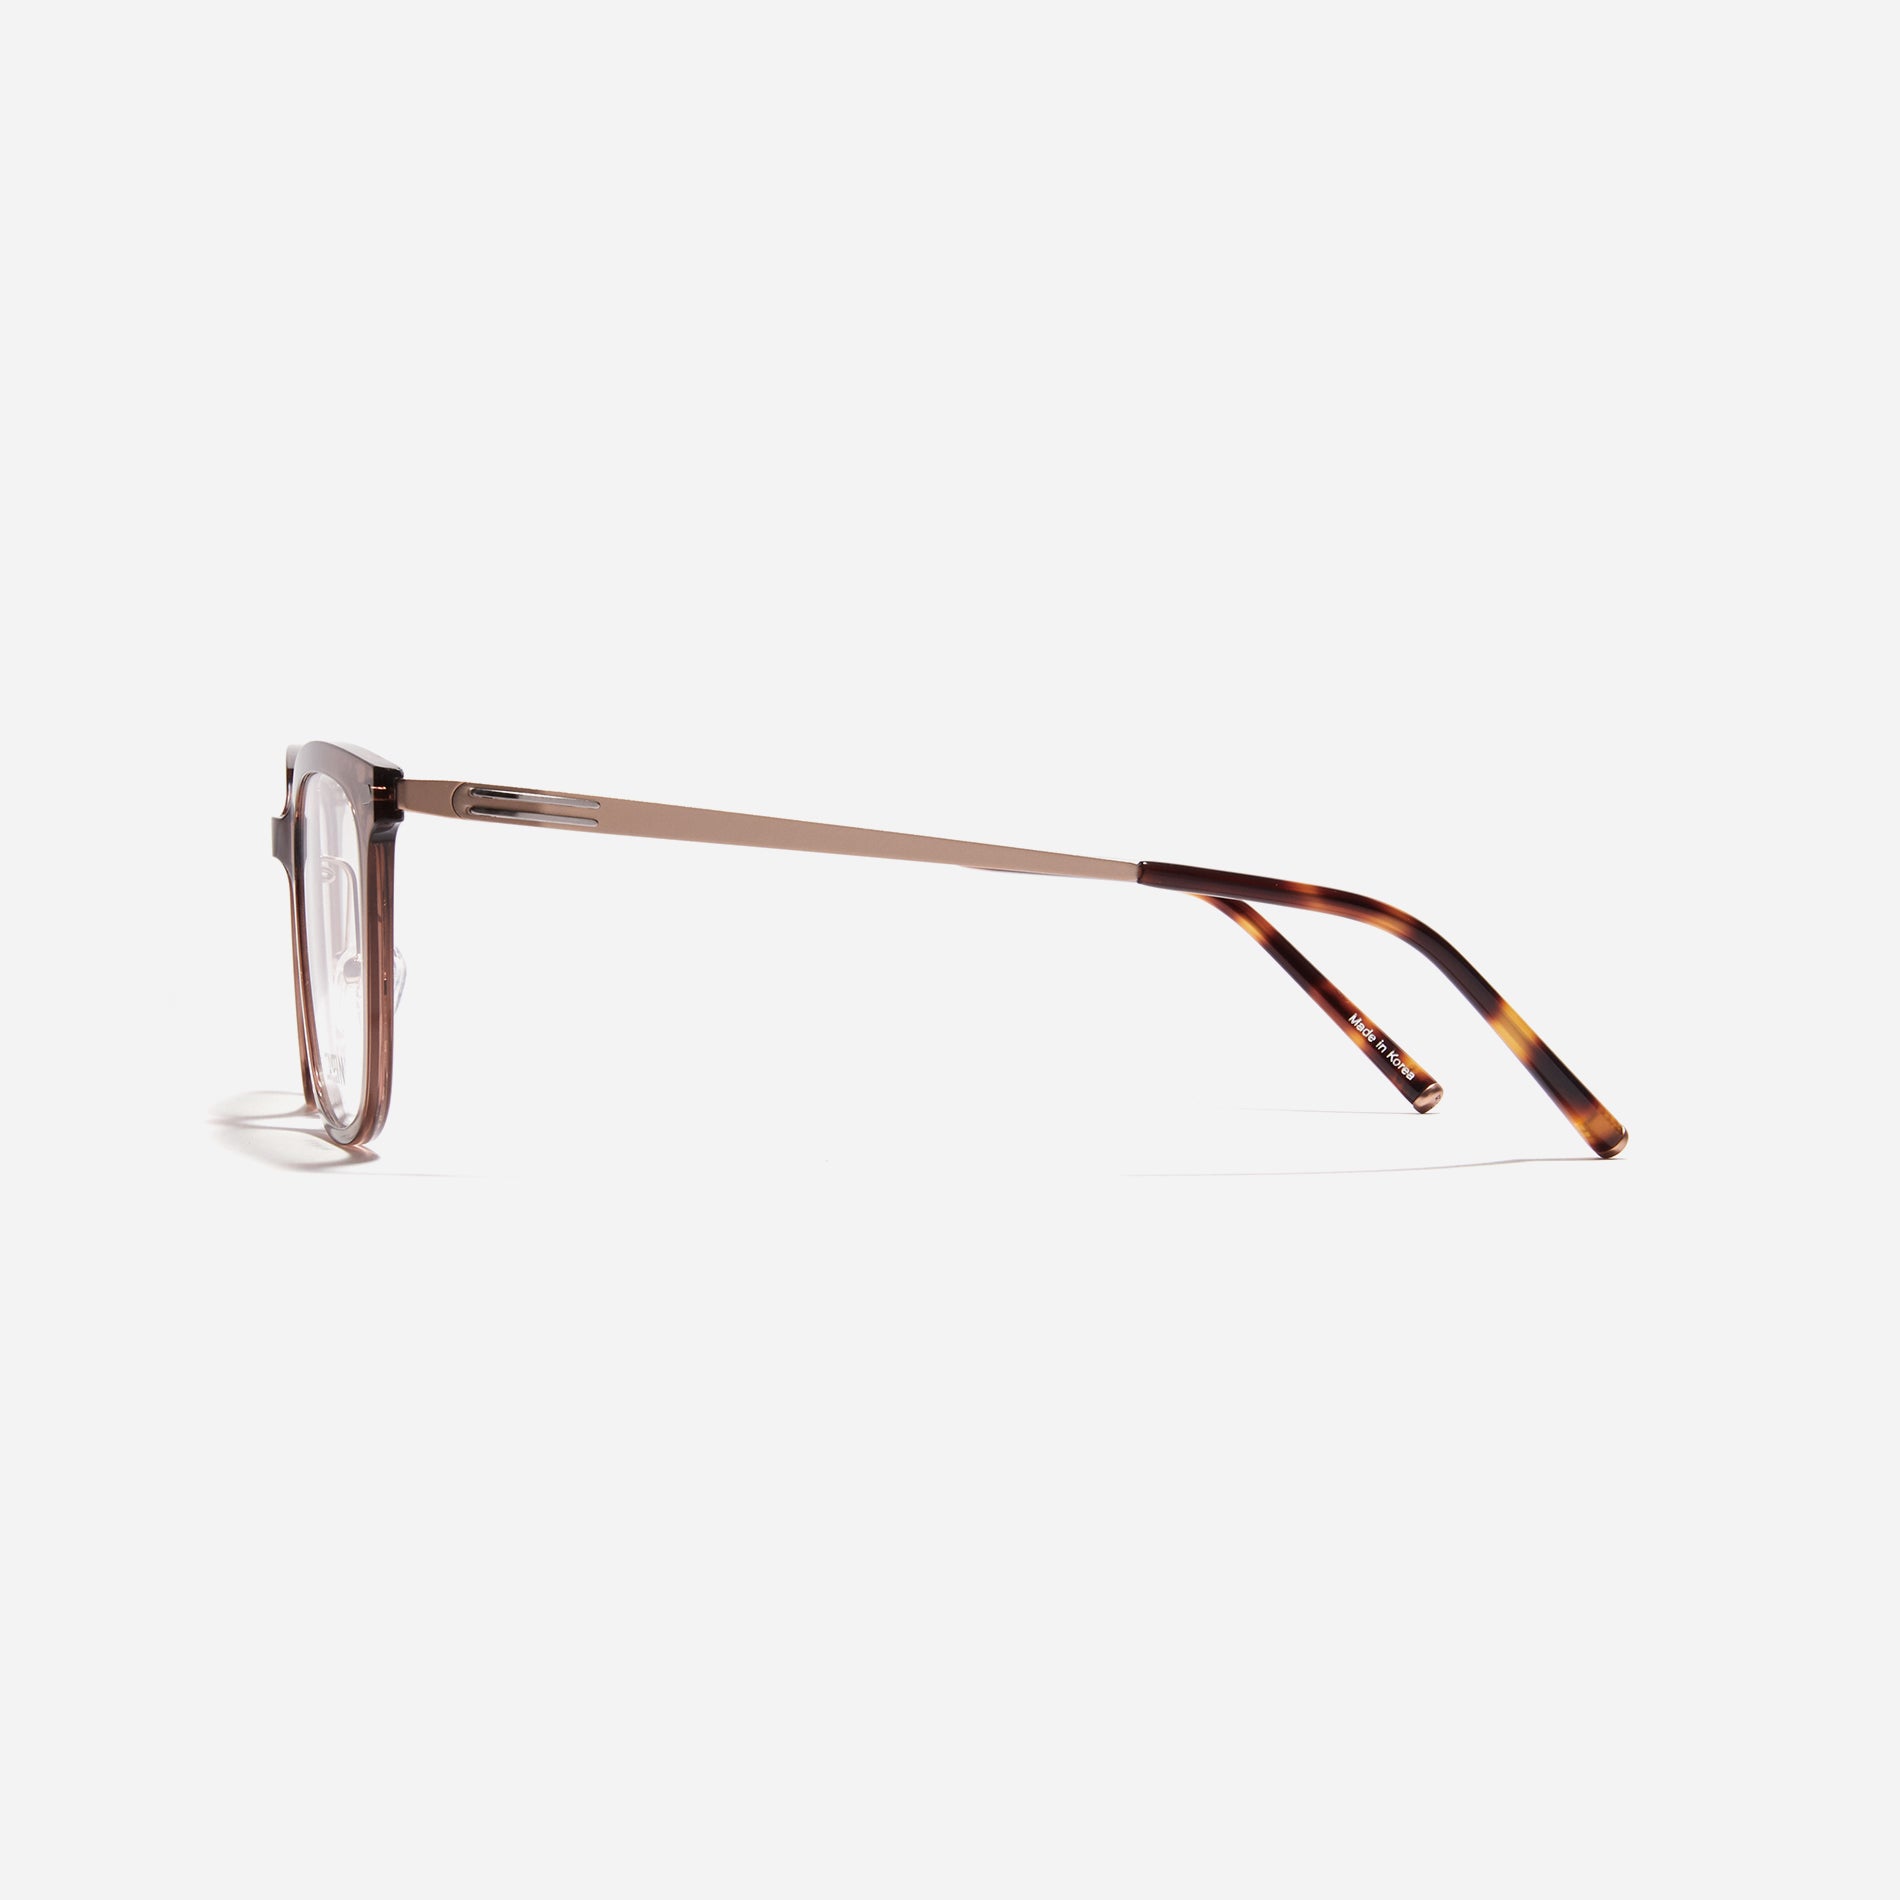 Square-shaped combination eyeglasses from CARIN's 'Feather Fit' line. Their combination frame seamlessly blends bio-plastic and titanium, utilizing advanced injection molding technology, often seen in the manufacturing of cell phones and watches. 